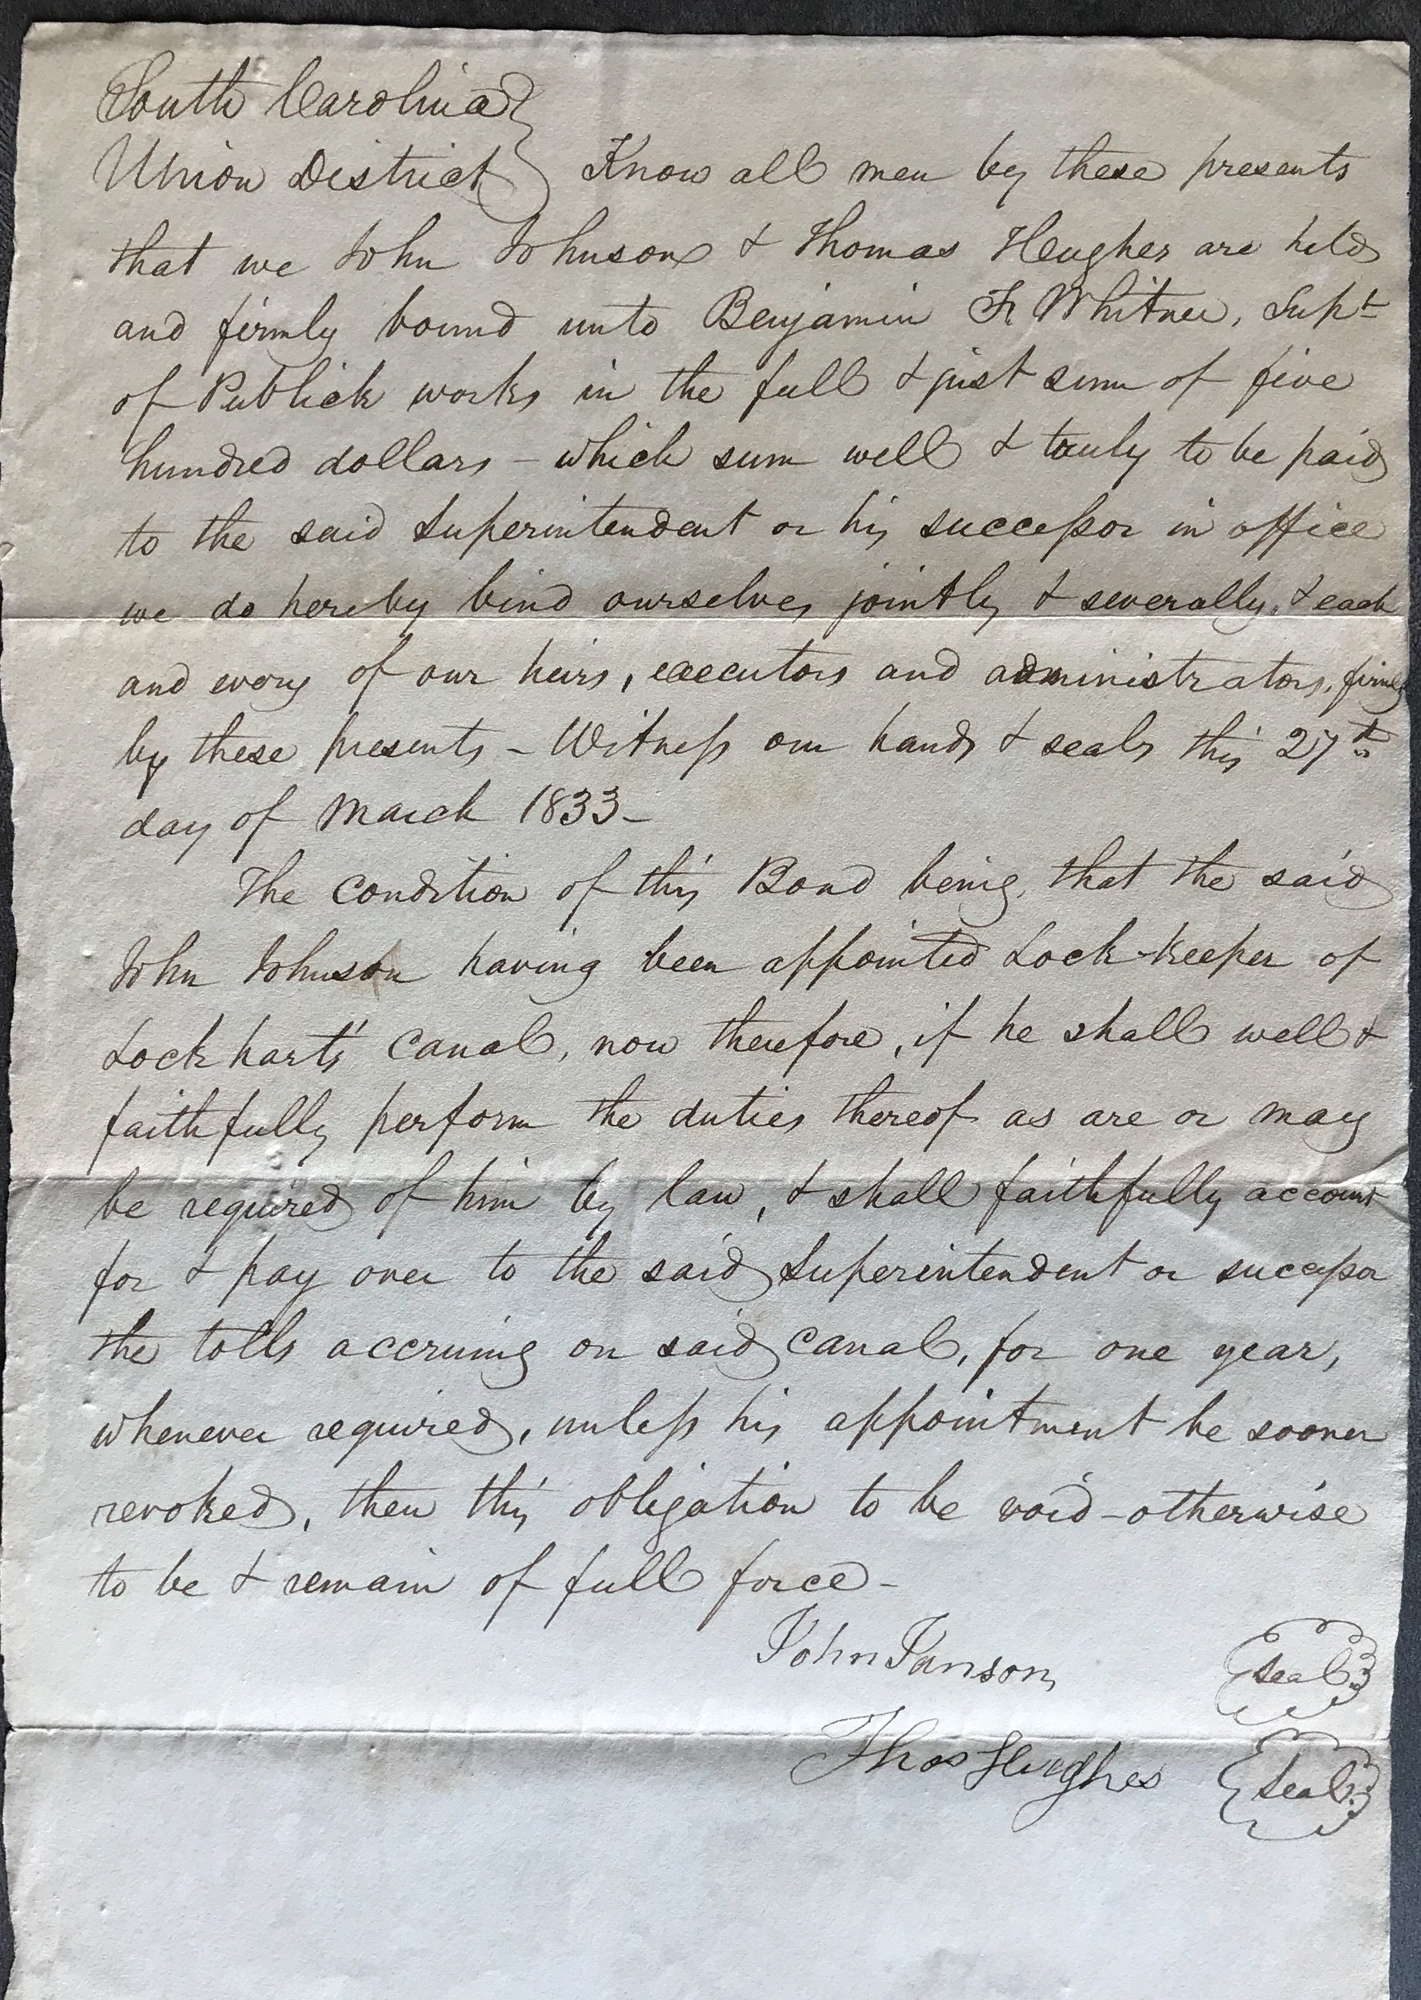 1833 CONTRACT FOR OPERATING THE LOCKHART CANAL